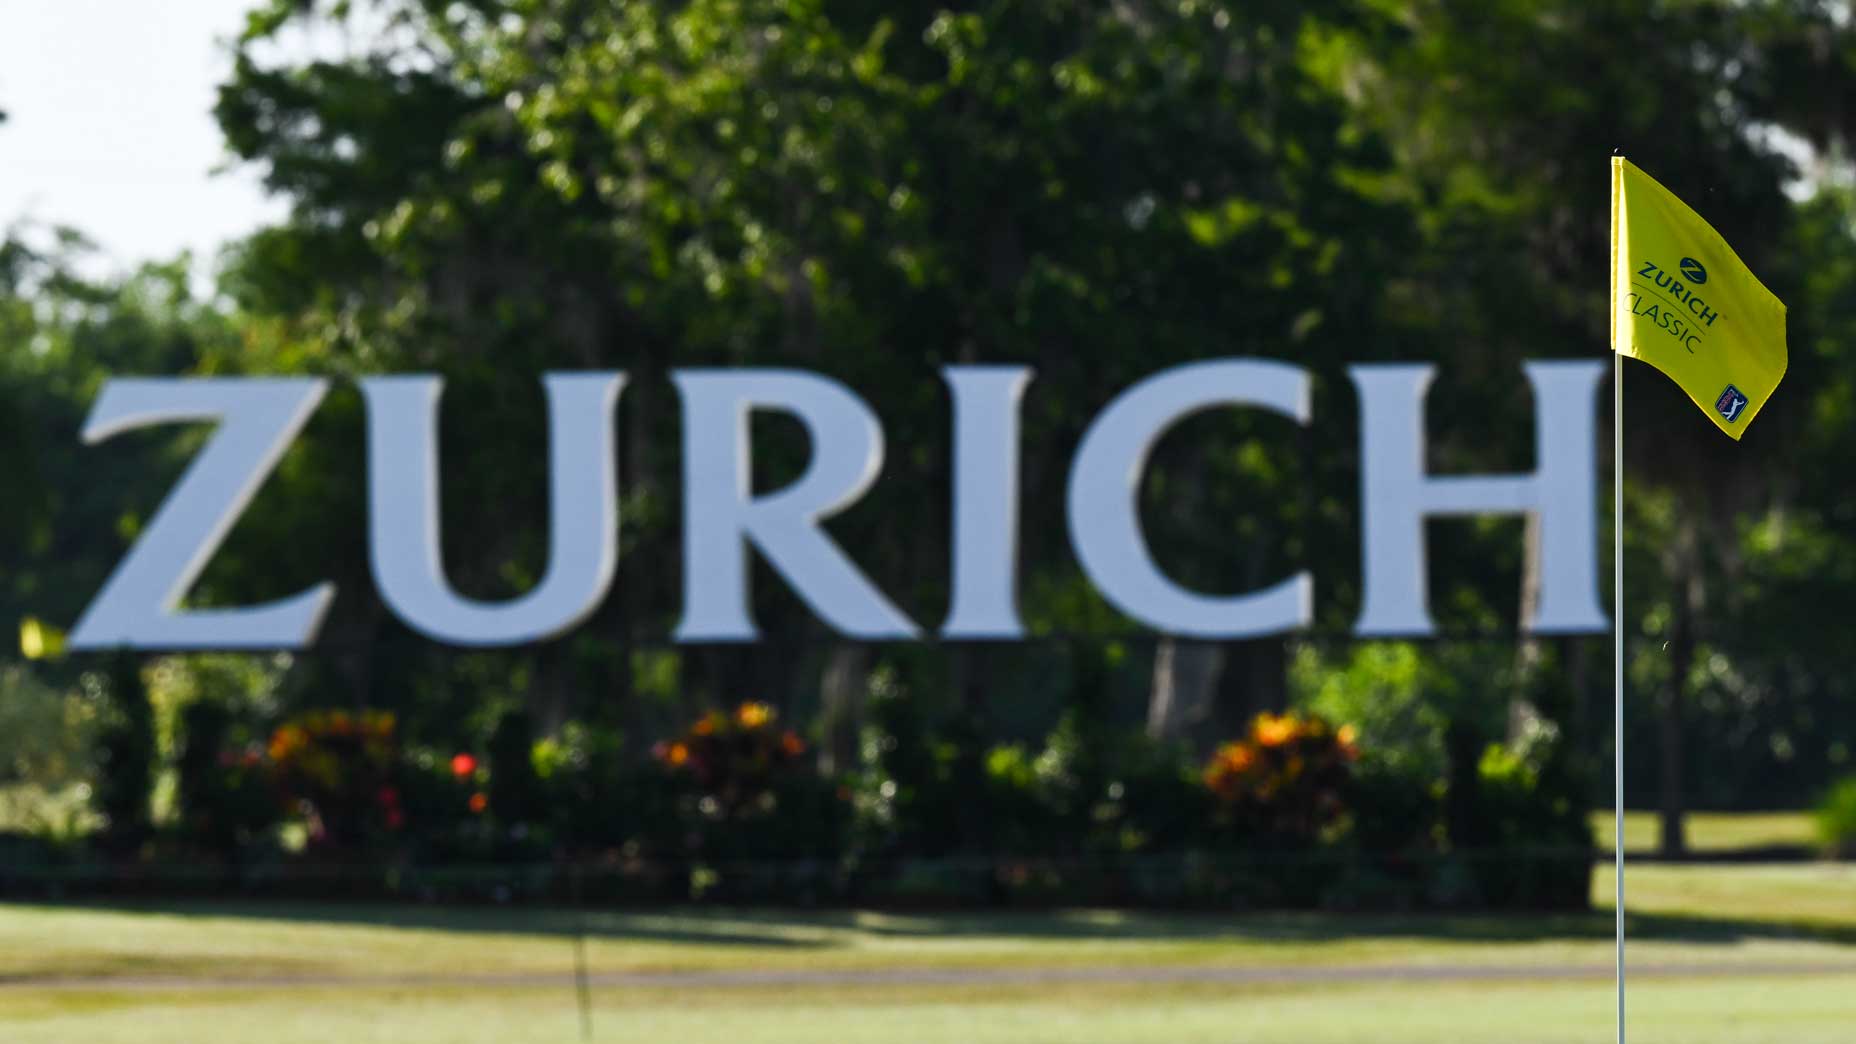 A Zurich Classic sign looms in the background with a golf green and a Zurich Classic flagstick in the foreground